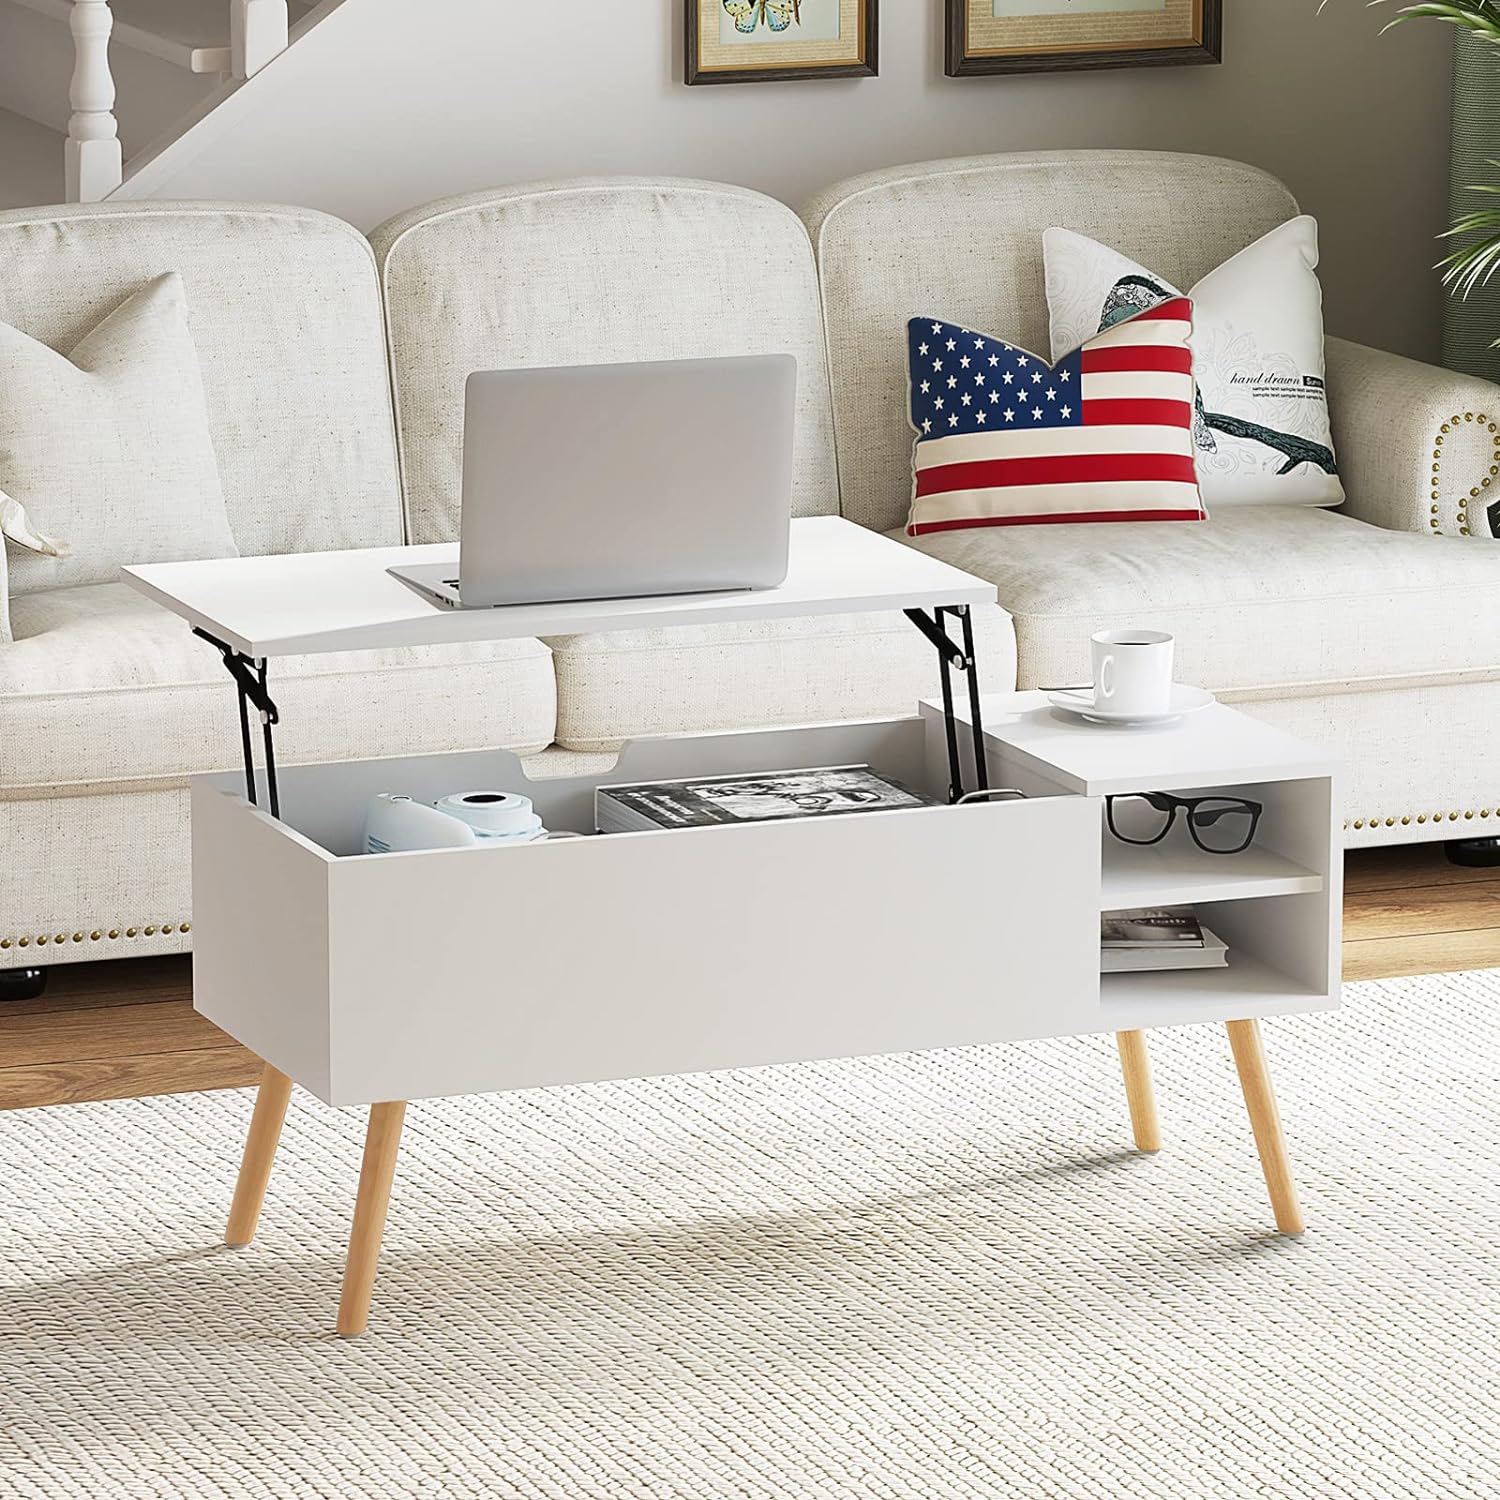 Tantmis Wood Lift Top Coffee Table with Storage